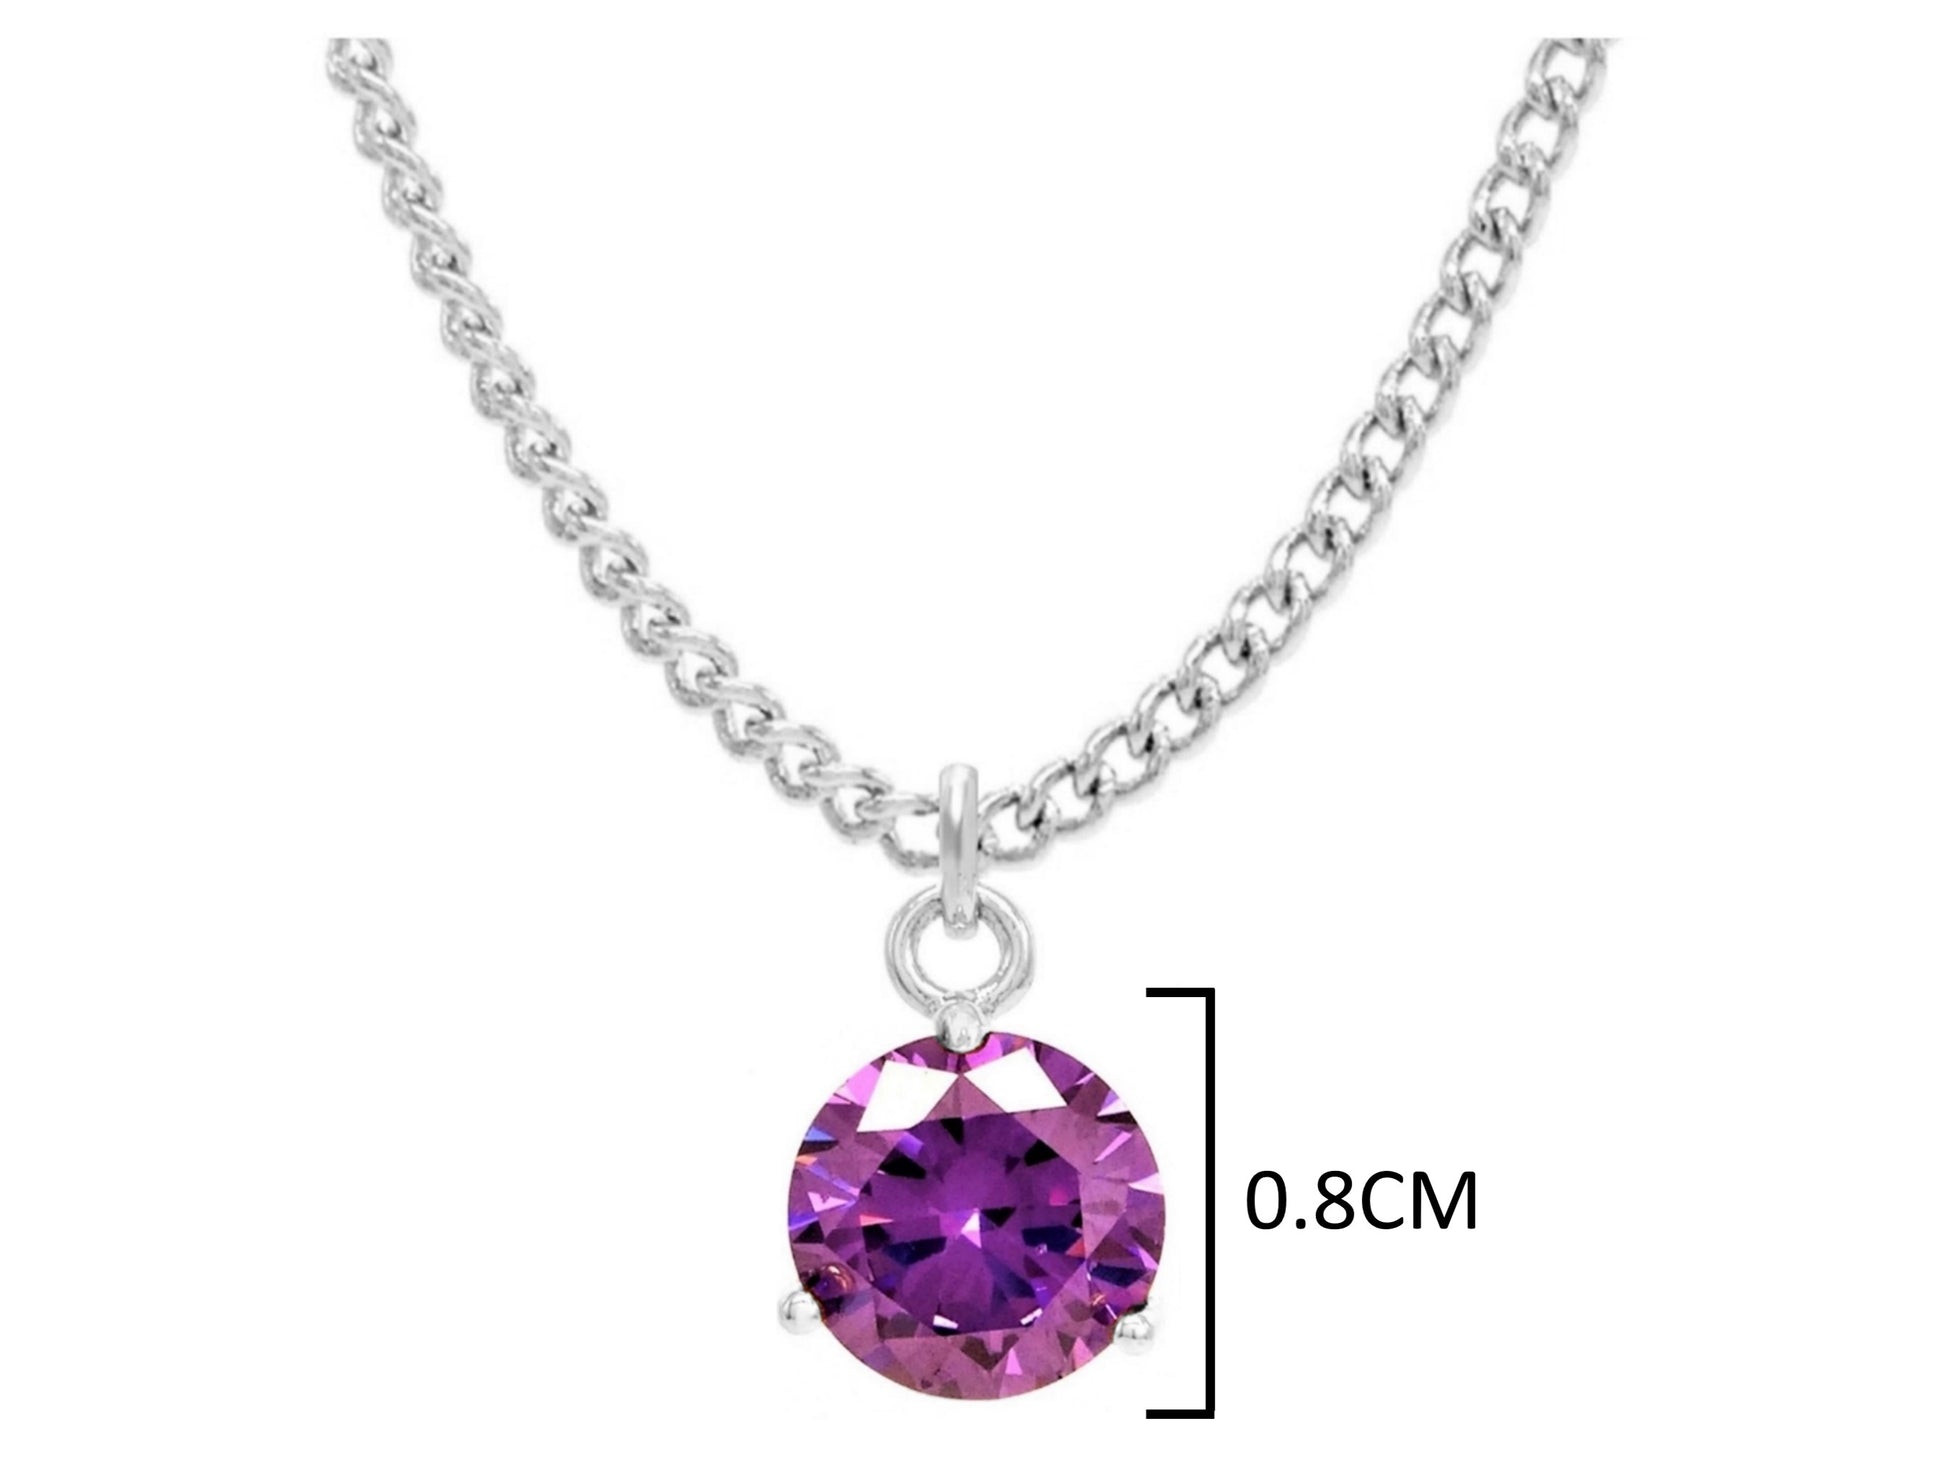 White gold purple round gem necklace and earrings MEASUREMENT